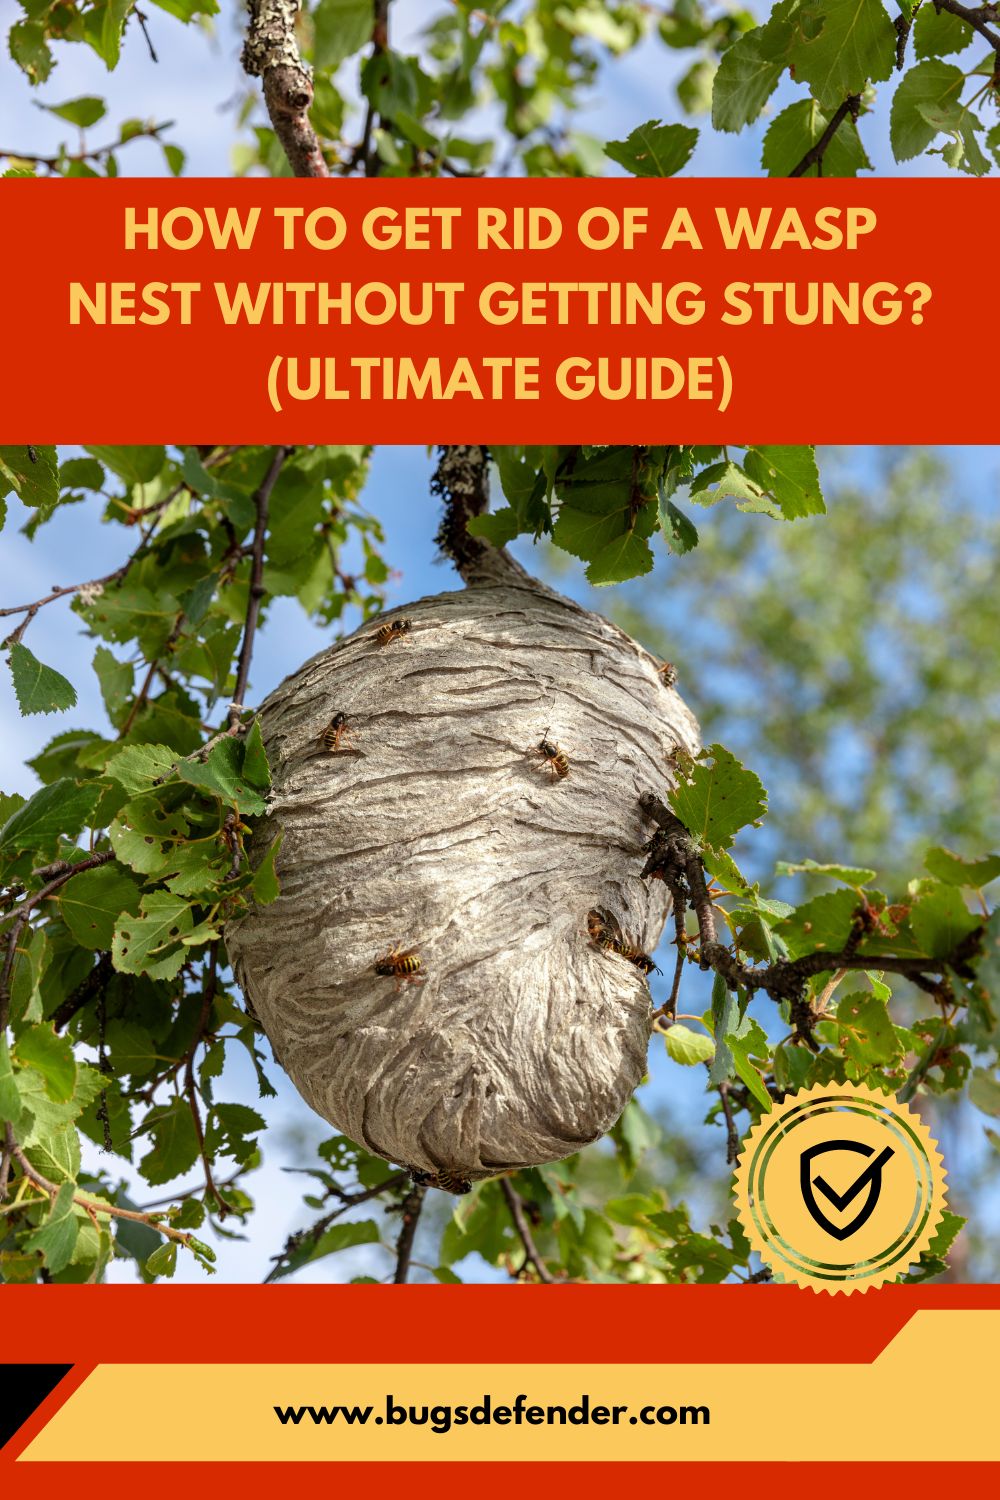 How To Get Rid Of A Wasp Nest Without Getting Stung pin1